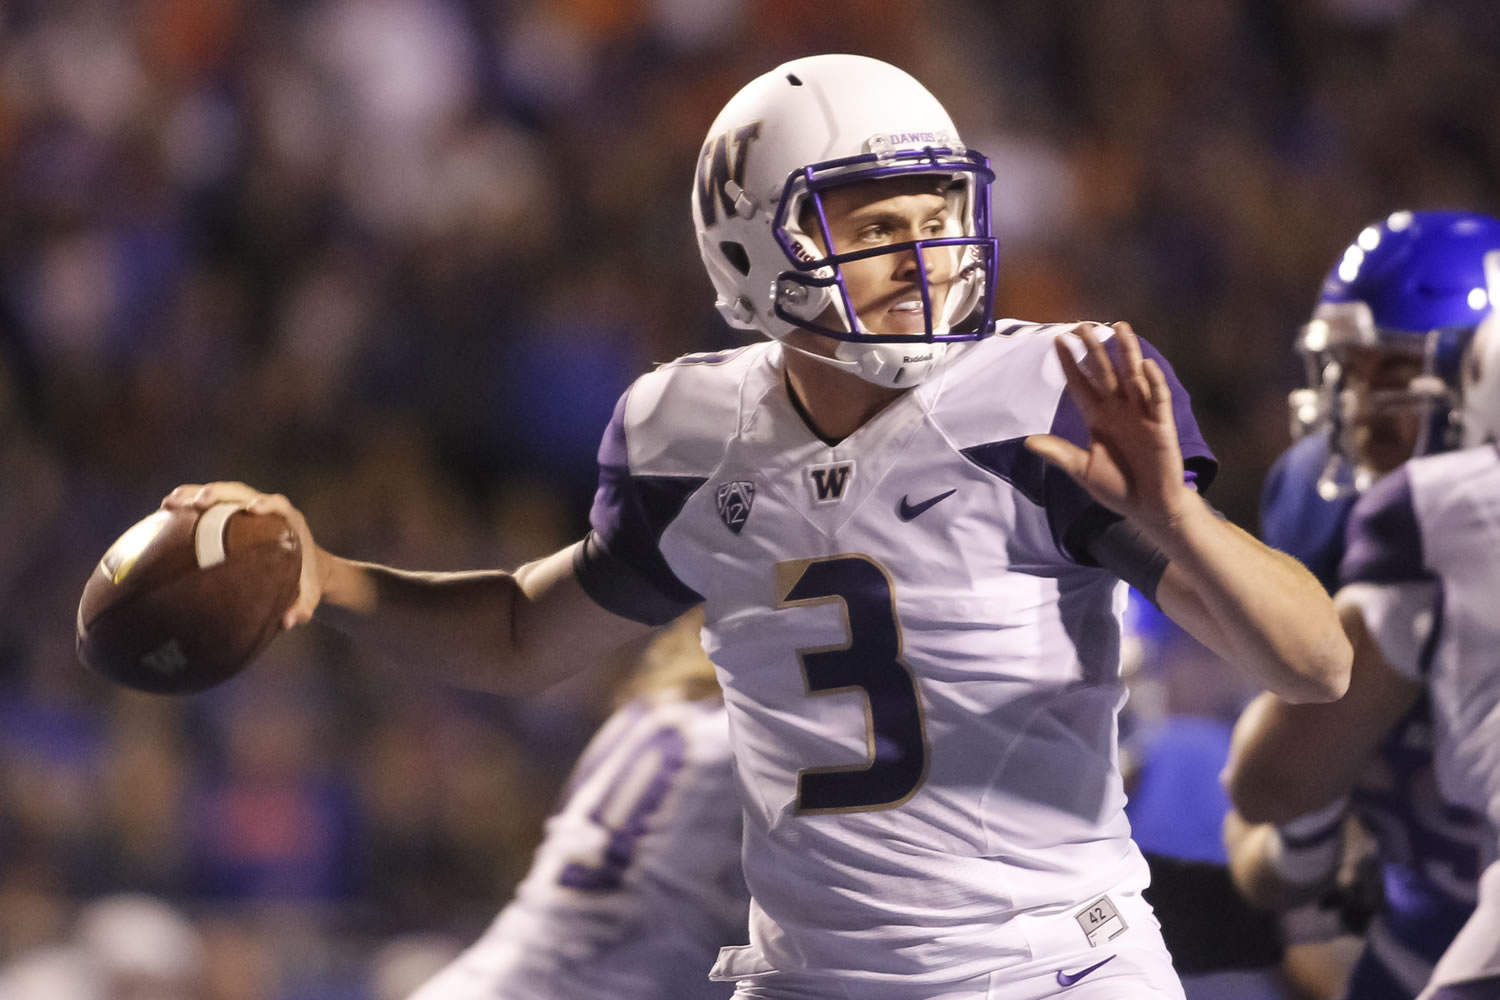 Washington quarterback Jake Browning looks for a receiver during the first half of an NCAA college football game against Boise State in Boise, Idaho, on Friday, Sept. 4, 2015.